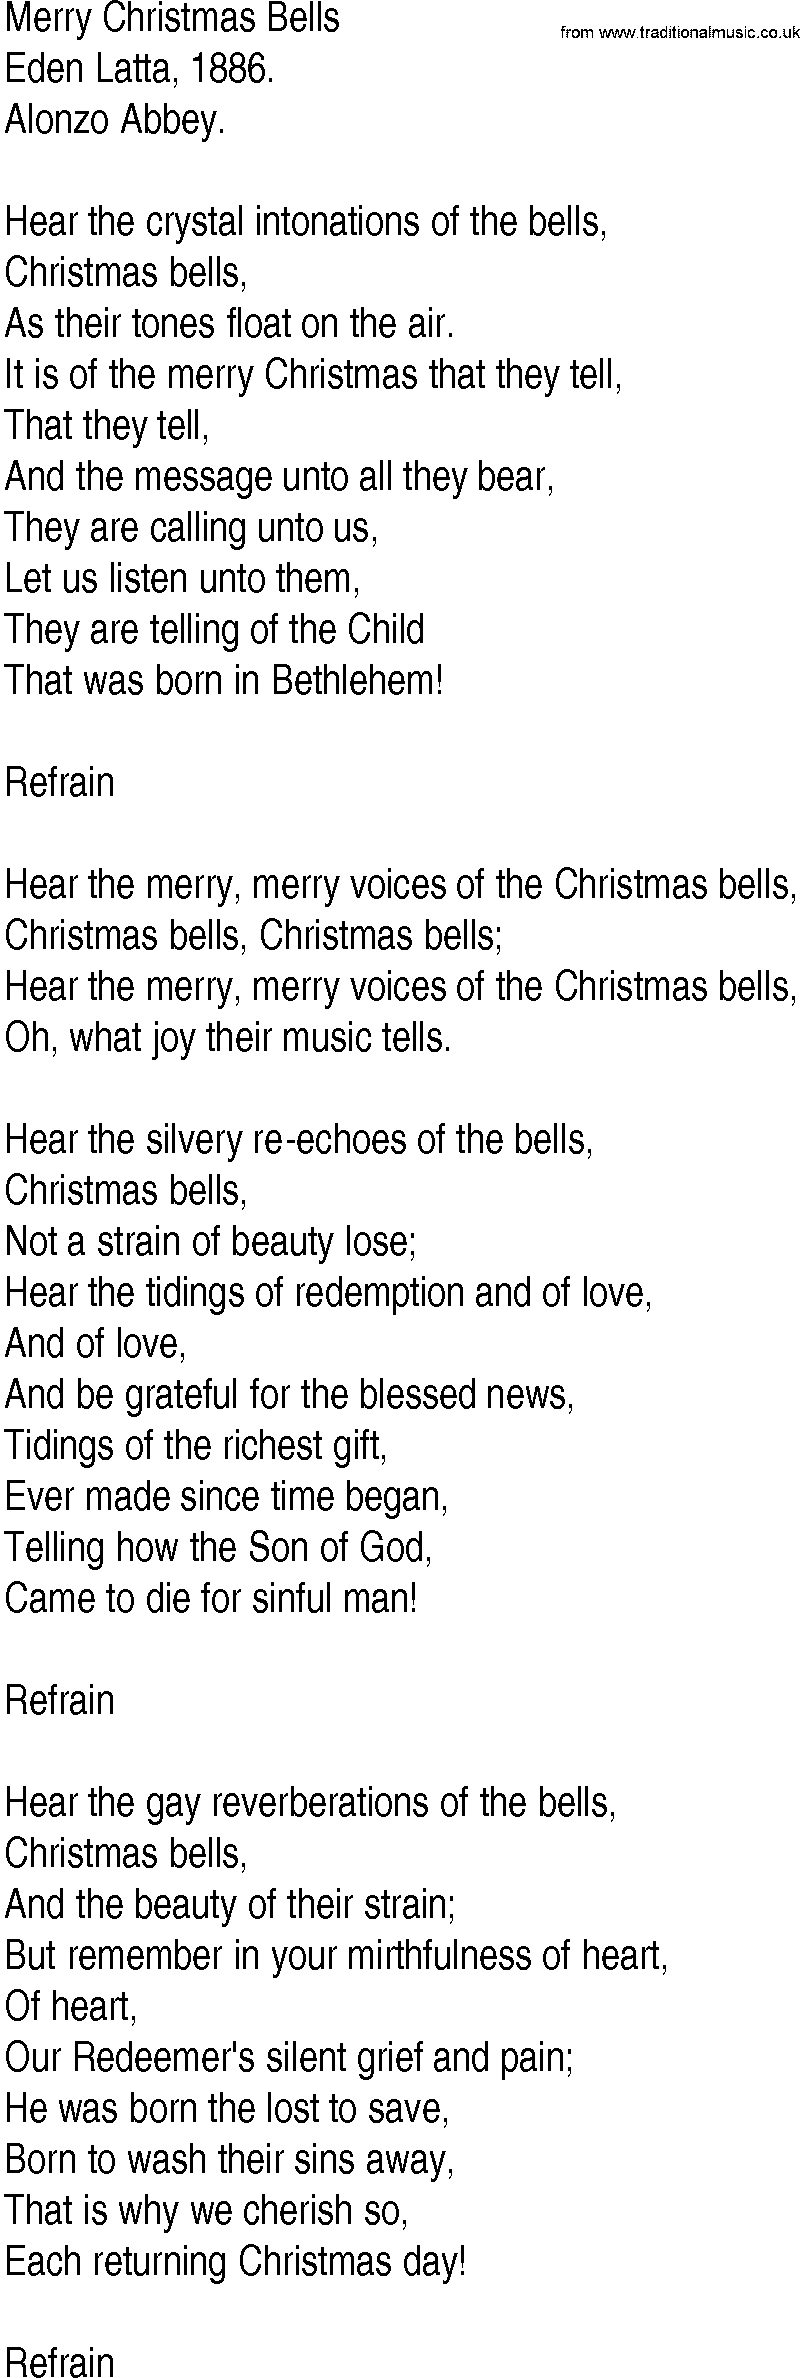 Hymn And Gospel Song Lyrics For Merry Christmas Bells By Eden Latta Lost eden genres technical brutal death metal. traditional music library